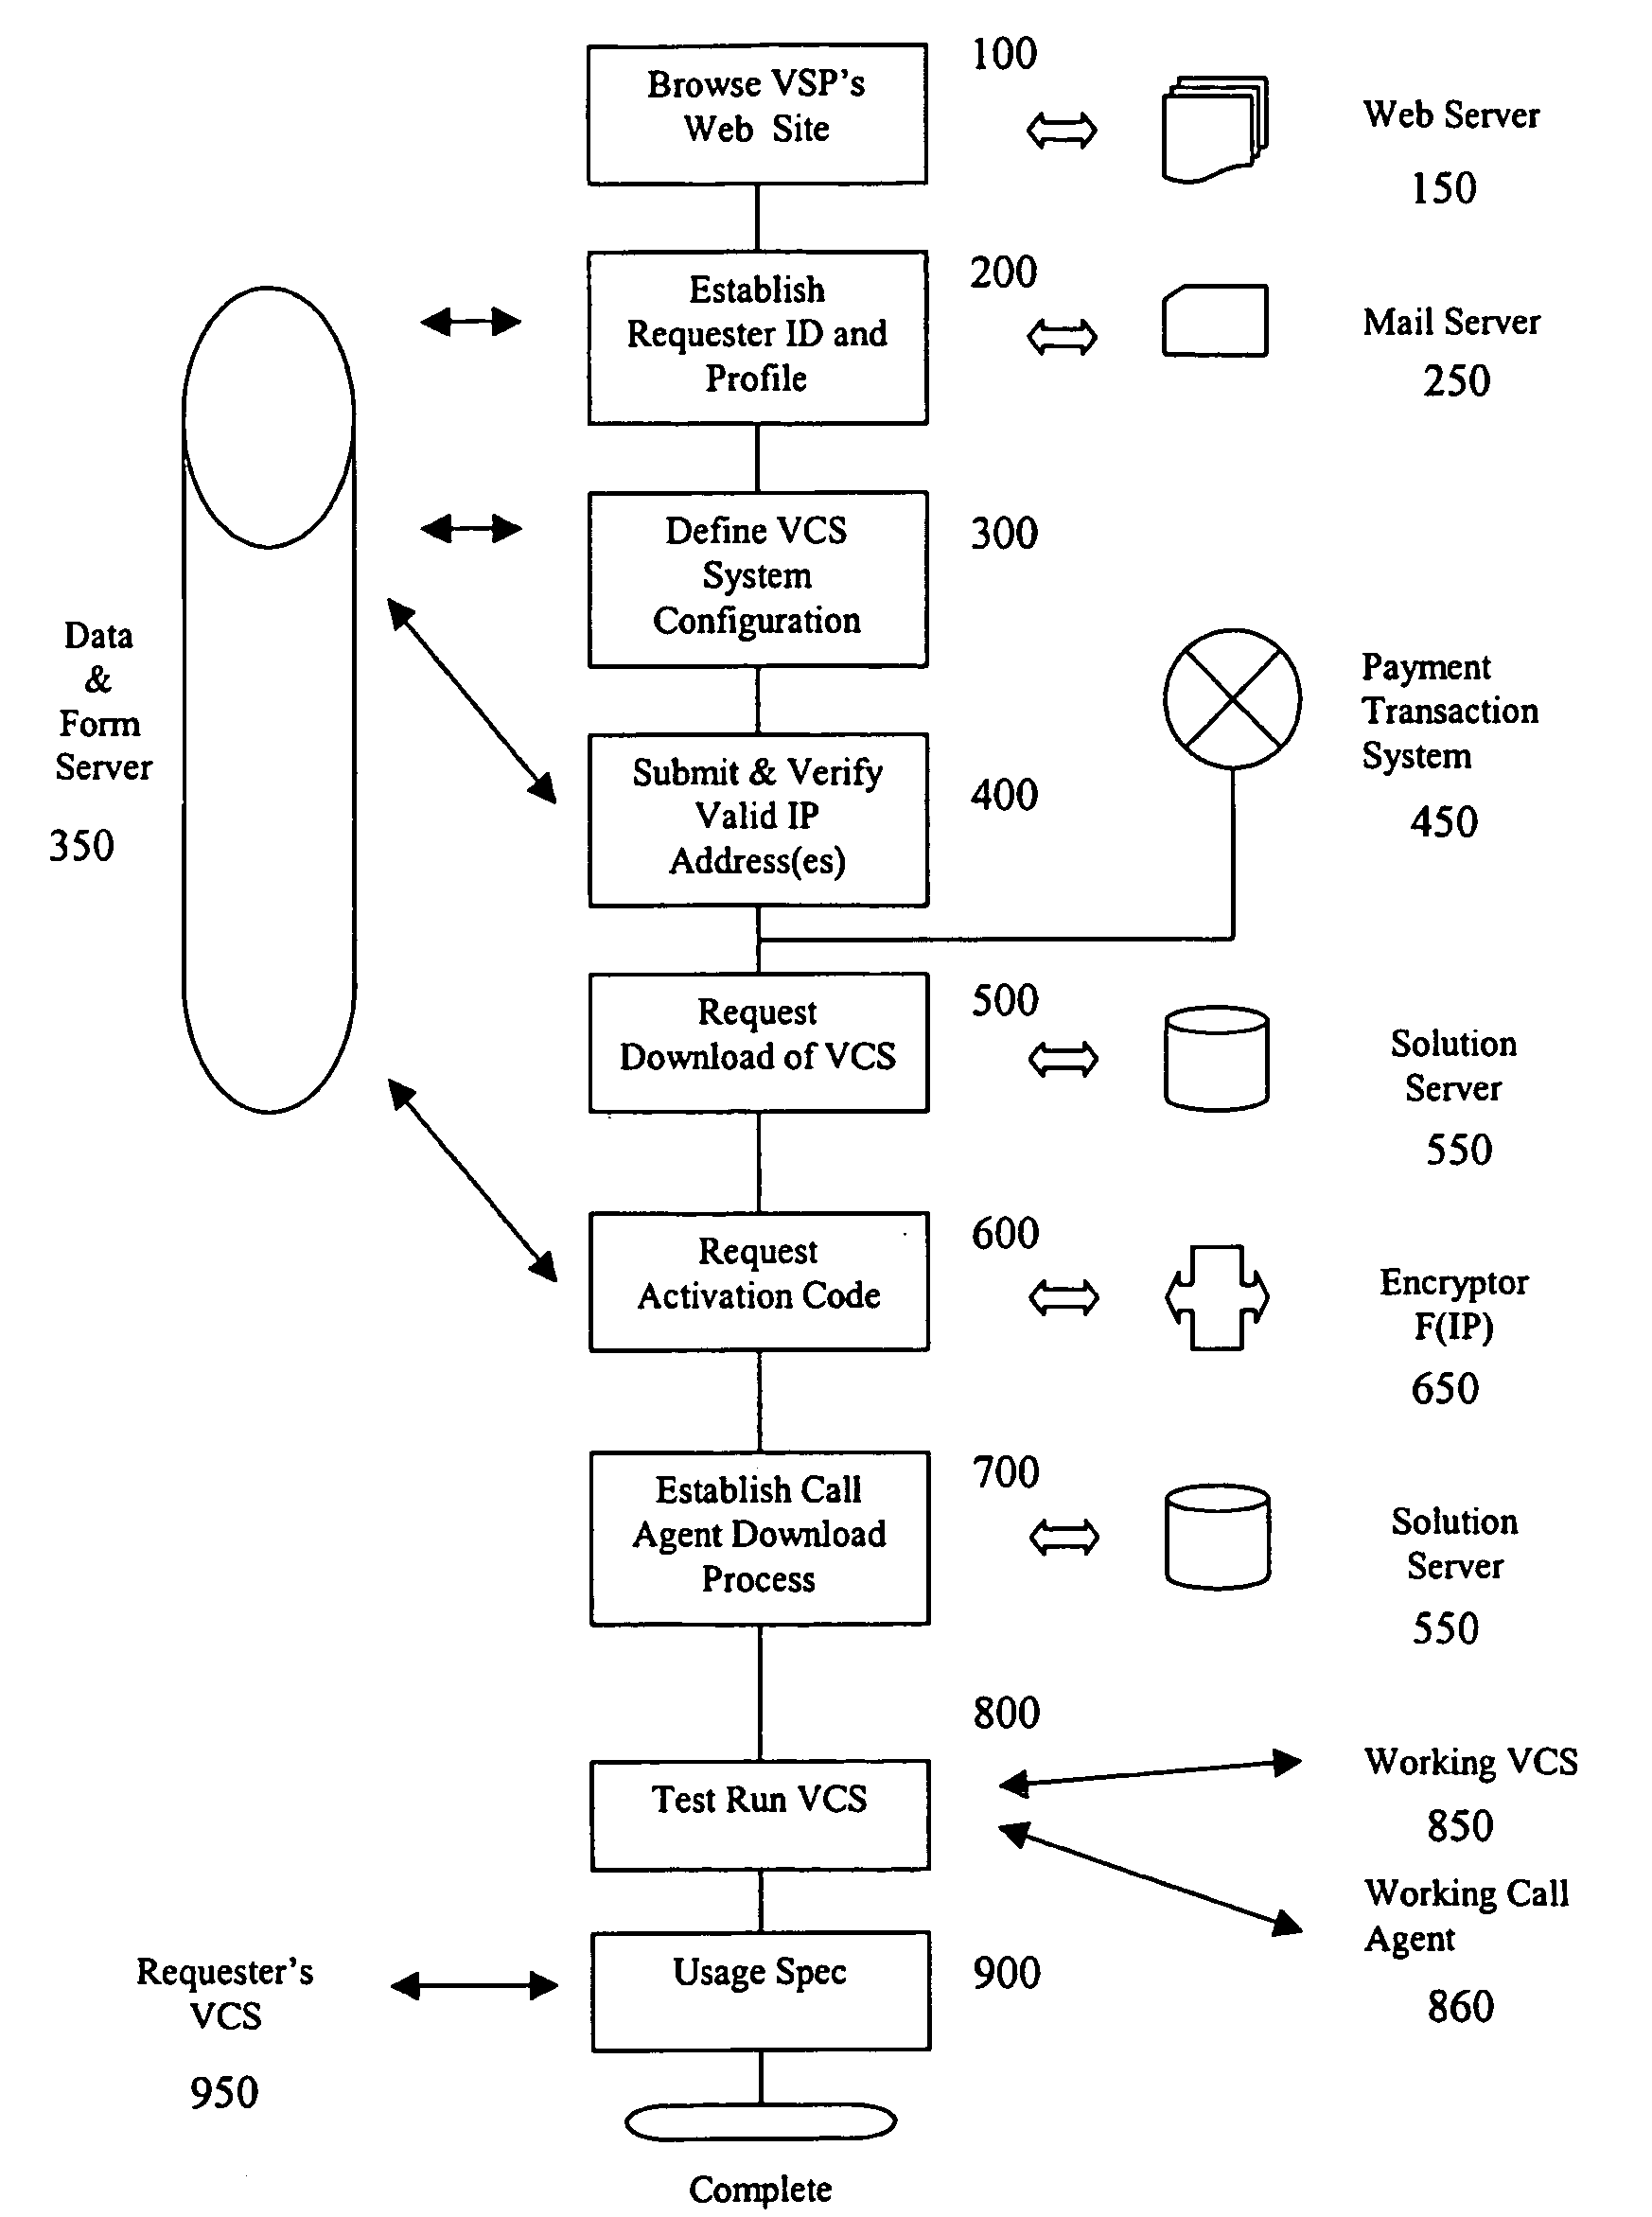 Method and system for establishing a voice communication service for business transactions and commerce applications